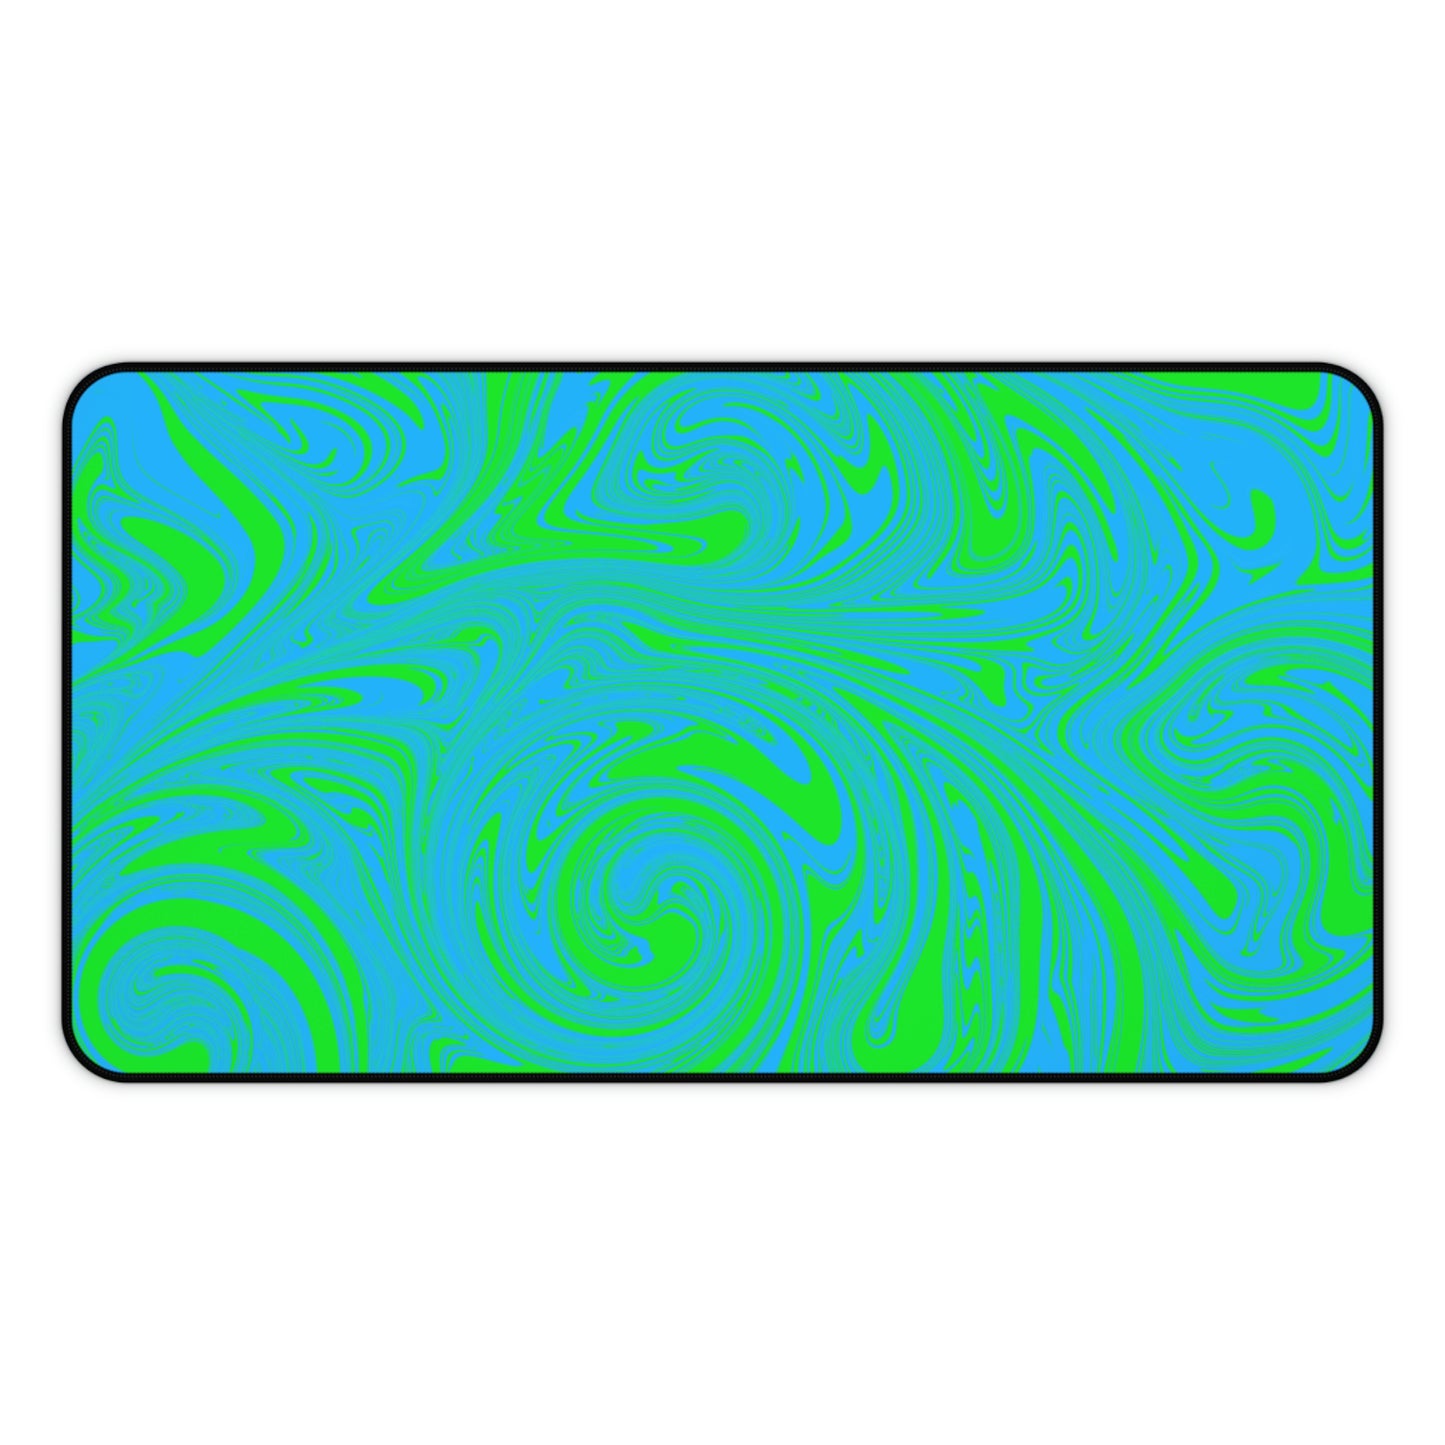 A 12" x 22" desk mat with blue and green swirls.